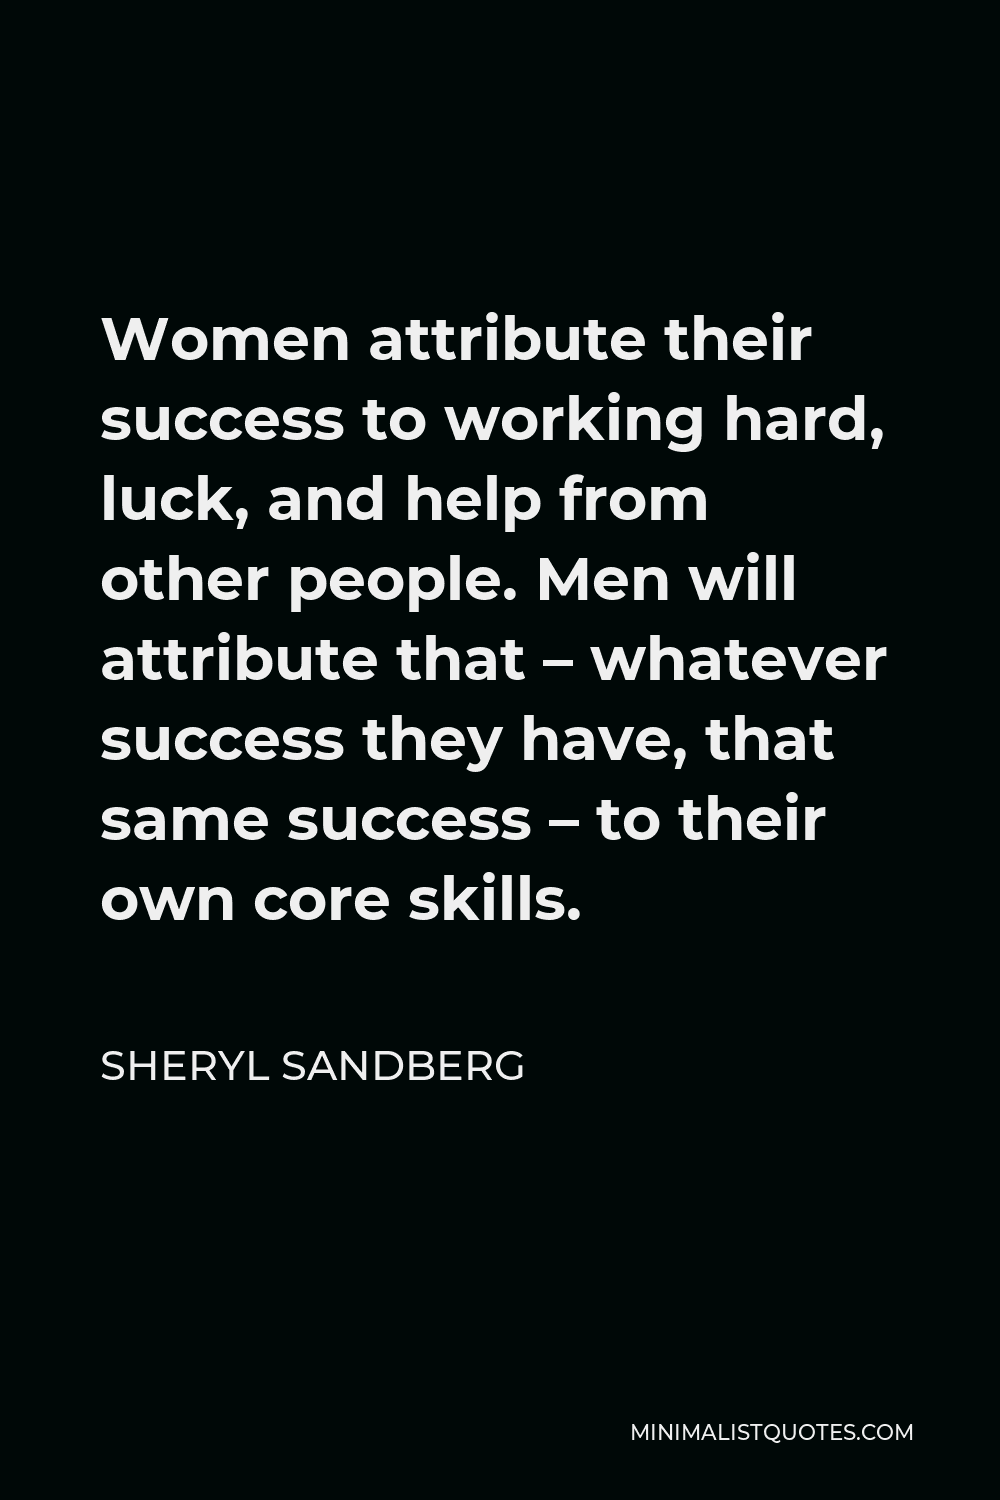 Women attribute their success to working hard, luck, and help from ...